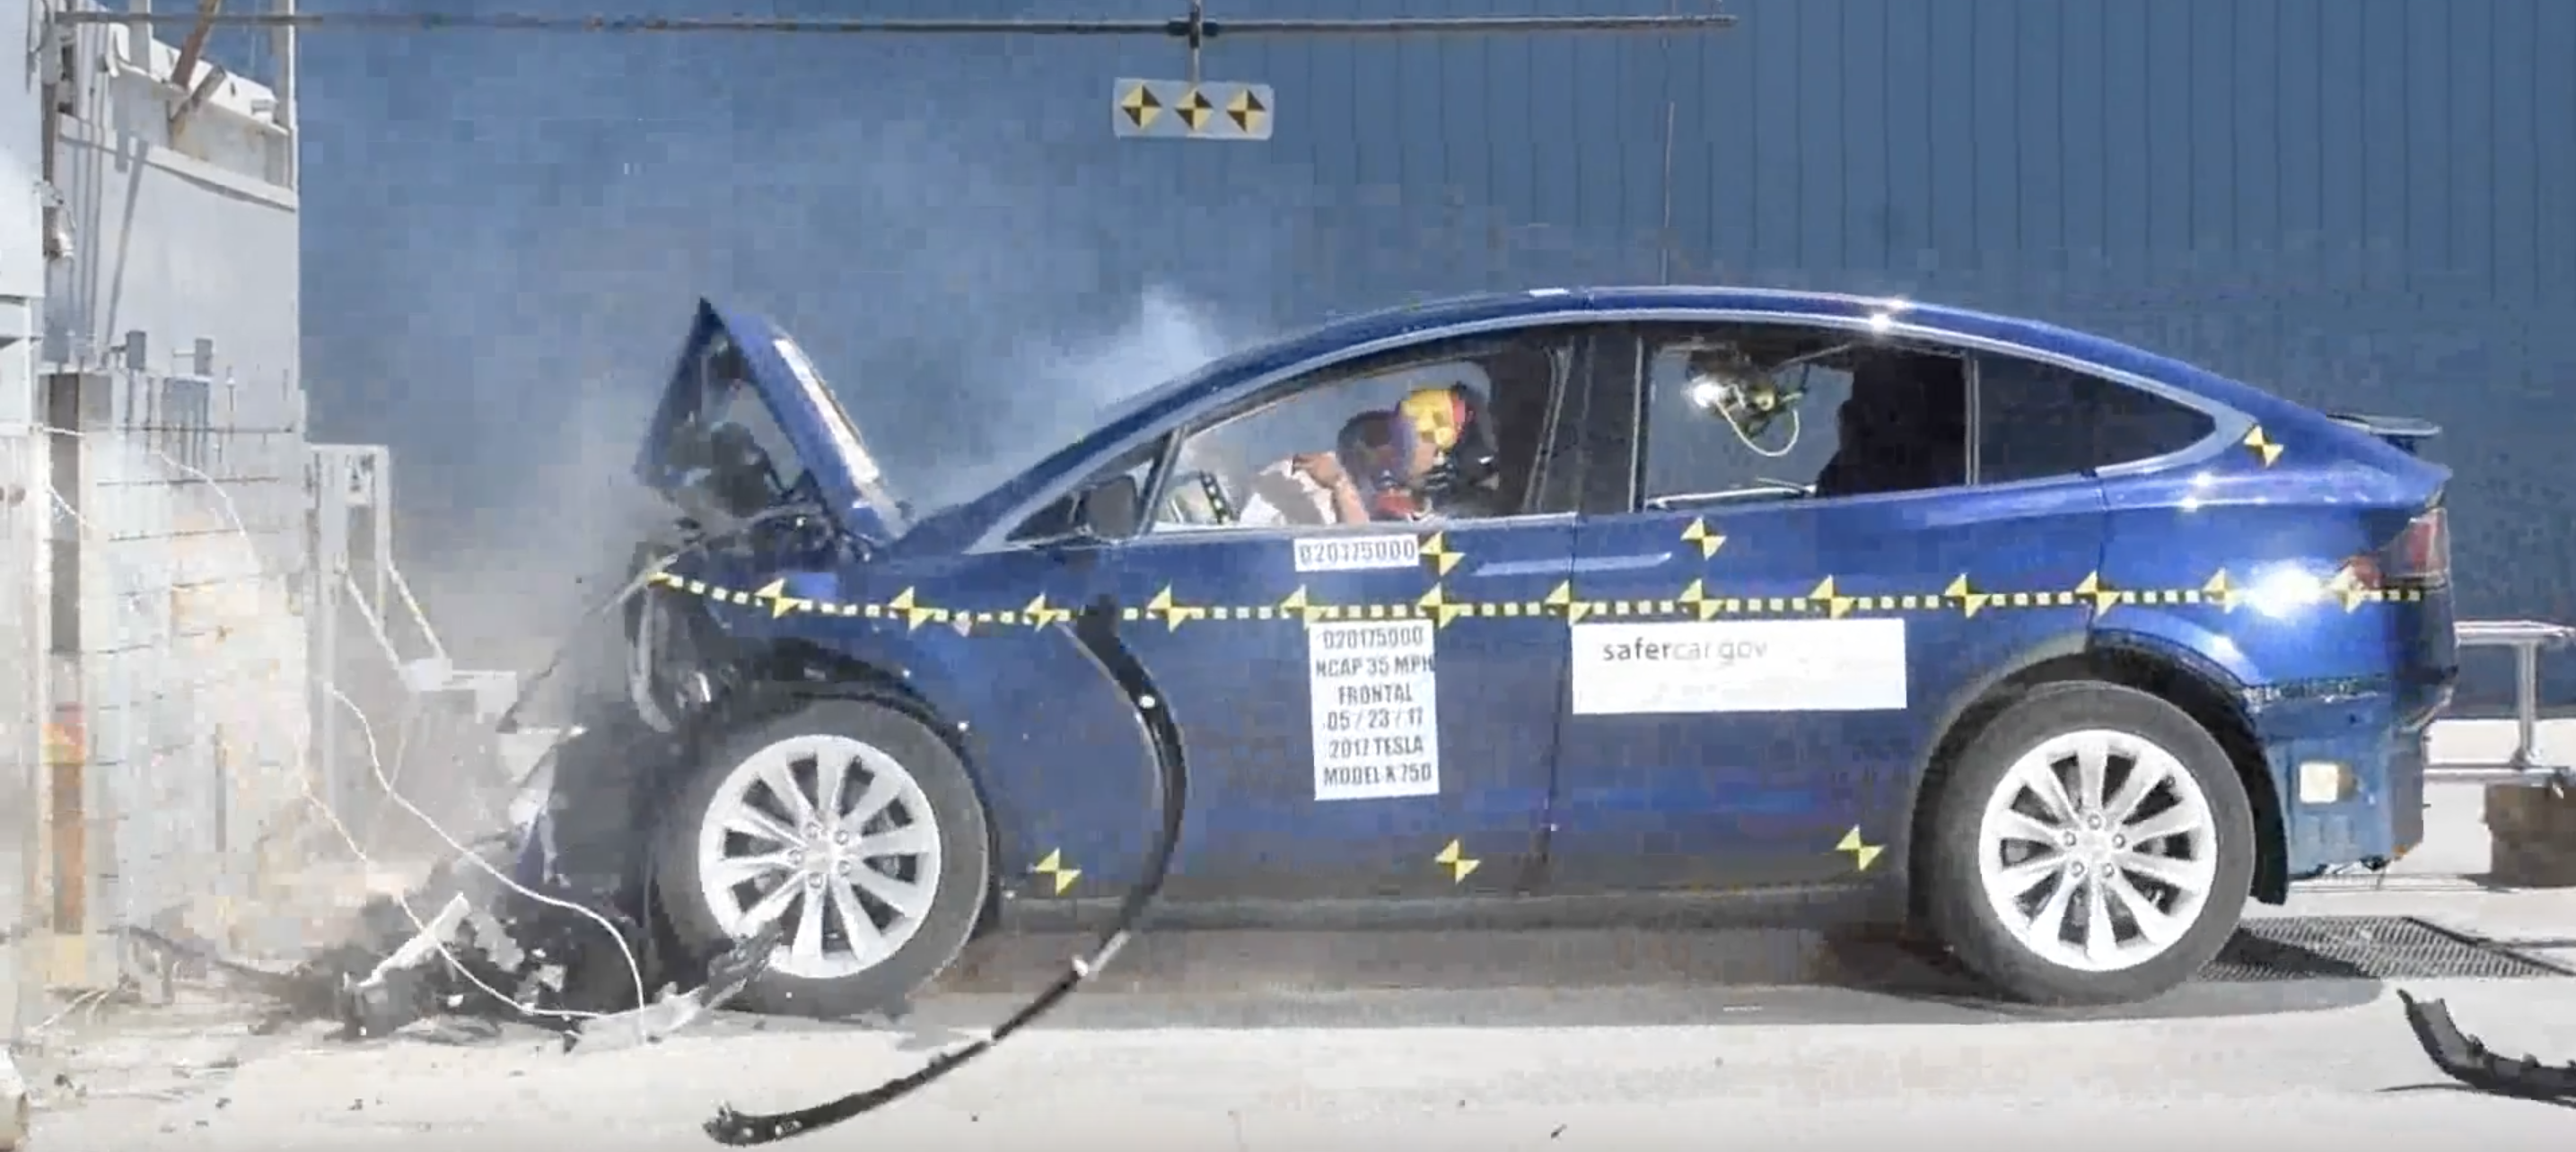 Tesla Model X the First SUV Ever to Achieve 5-Star Crash Rating in Every  Category